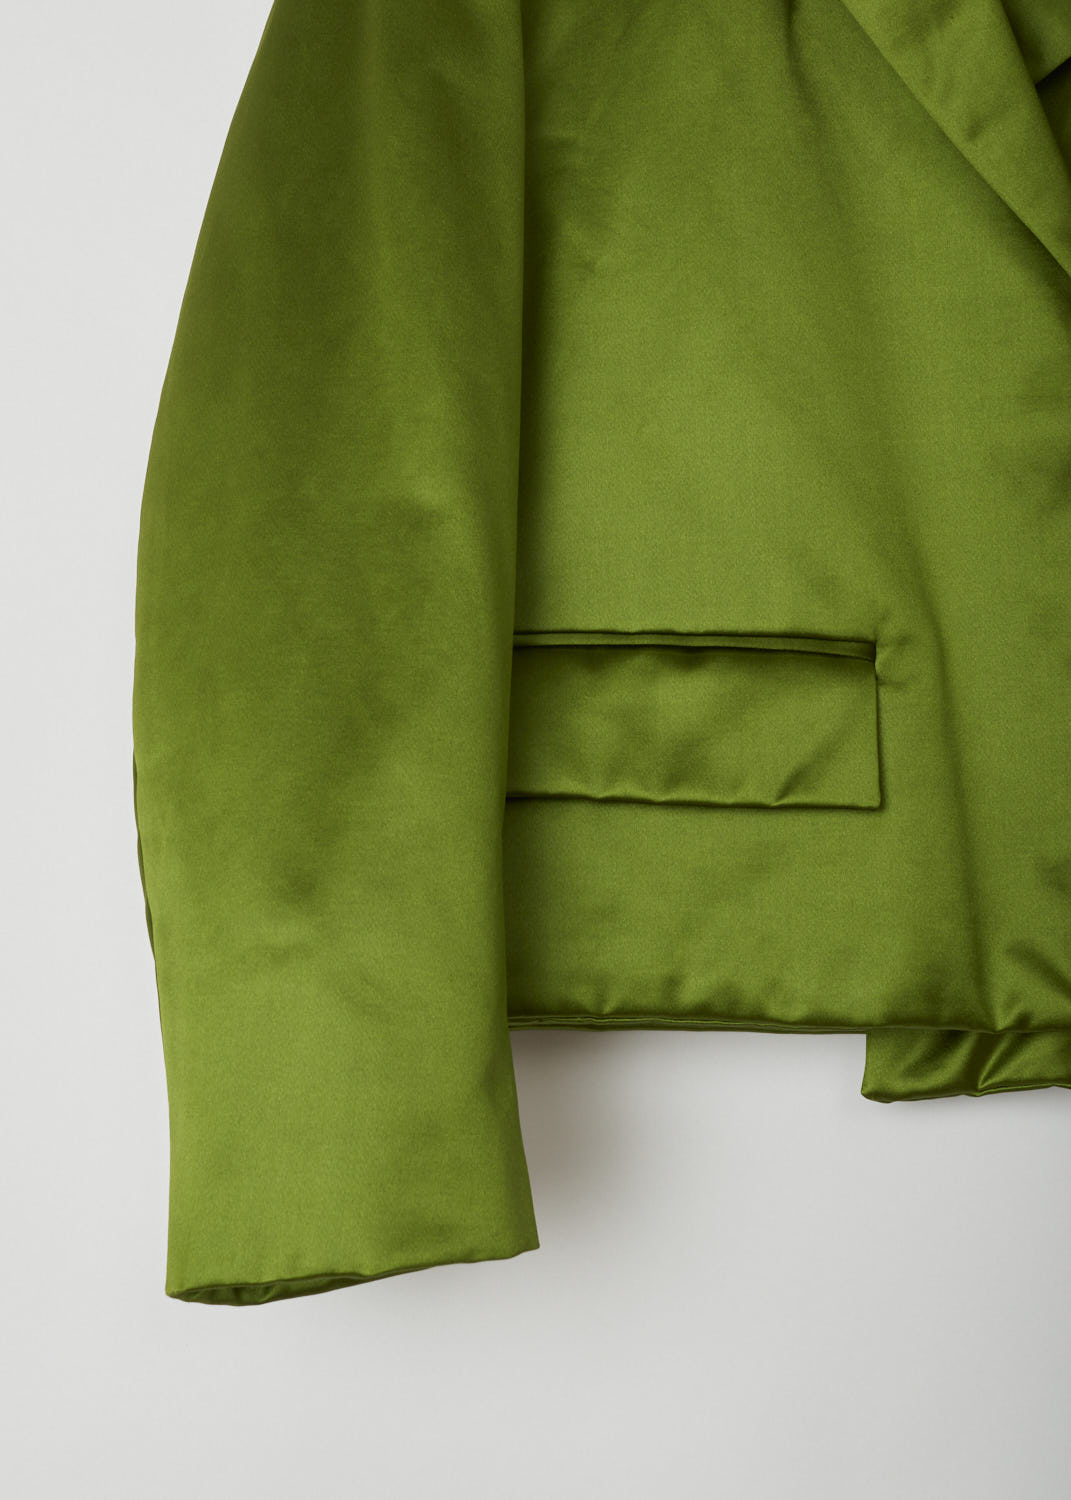 DRIES VAN NOTEN, METALLIC GREEN CROPPED JACKET, VONDI_3356_WW_JACKET_GRE, Green, Detail 1, This silky smooth cropped jacket has a notched lapel. The jacket does not have a closing function, meaning the jacket is open in the front. Two welt pockets with a flap can be found on the front of the jacket. 